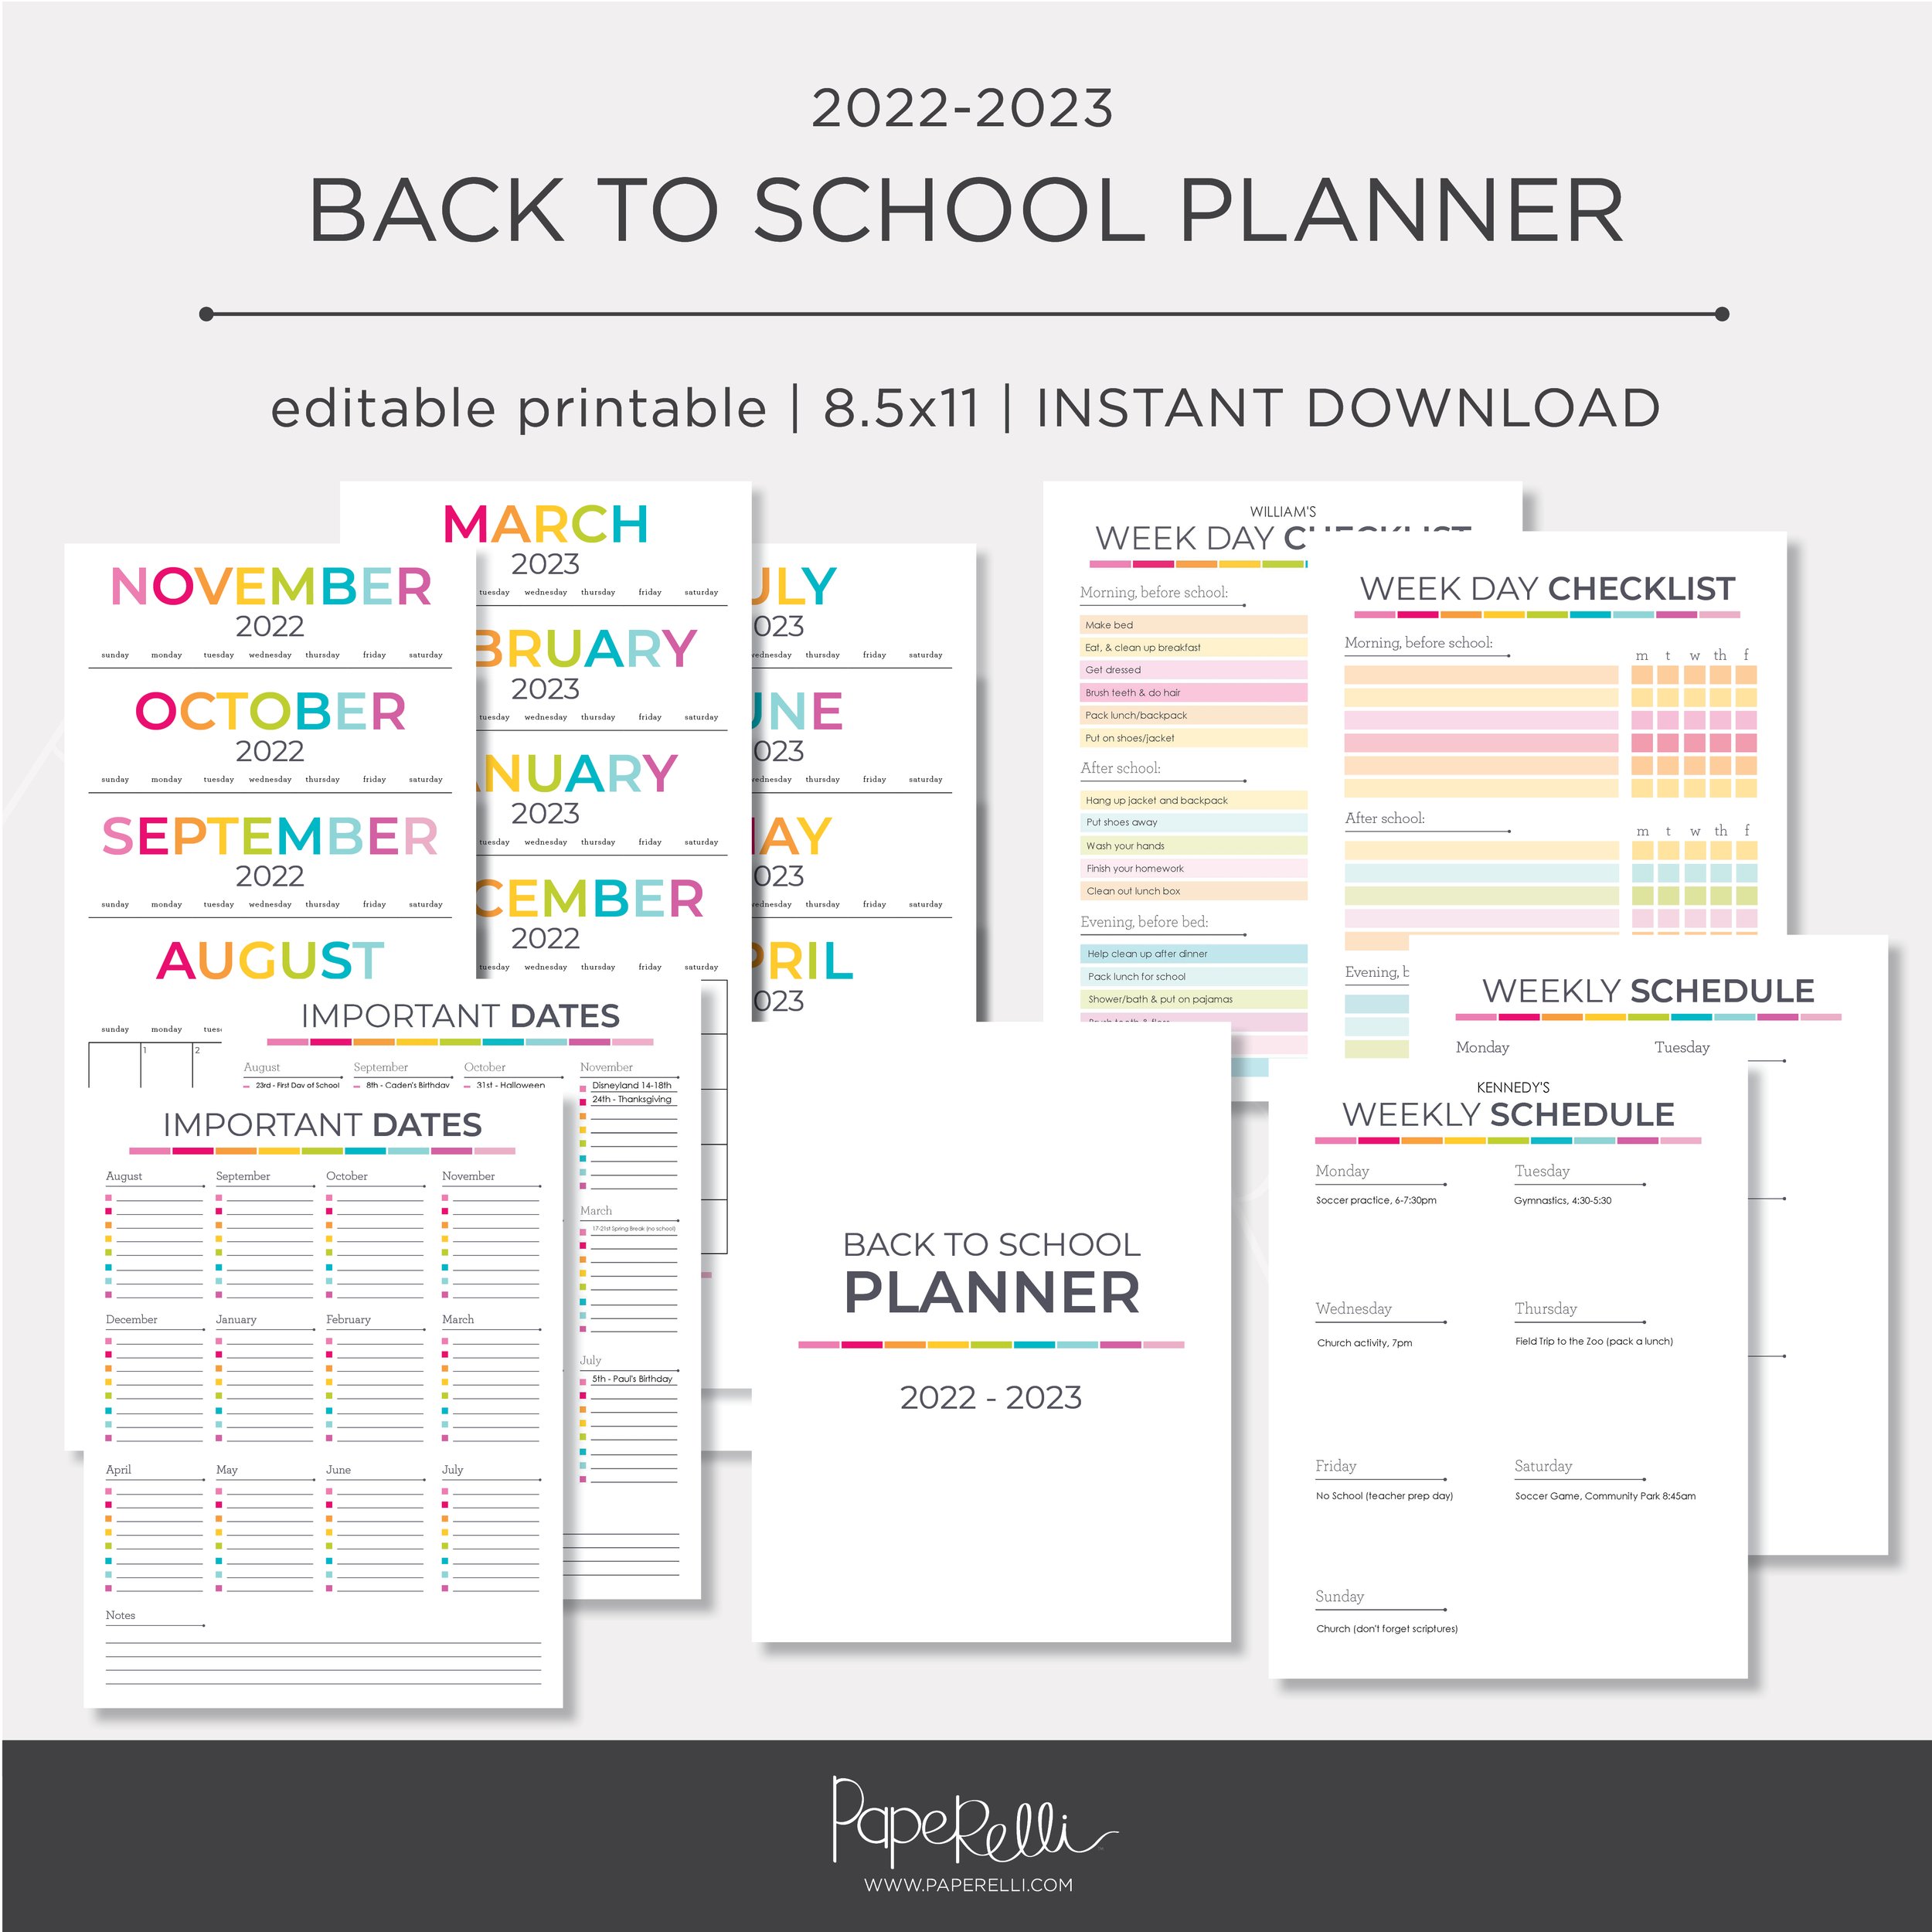 Etsy Picture - Back to School Planner.jpg